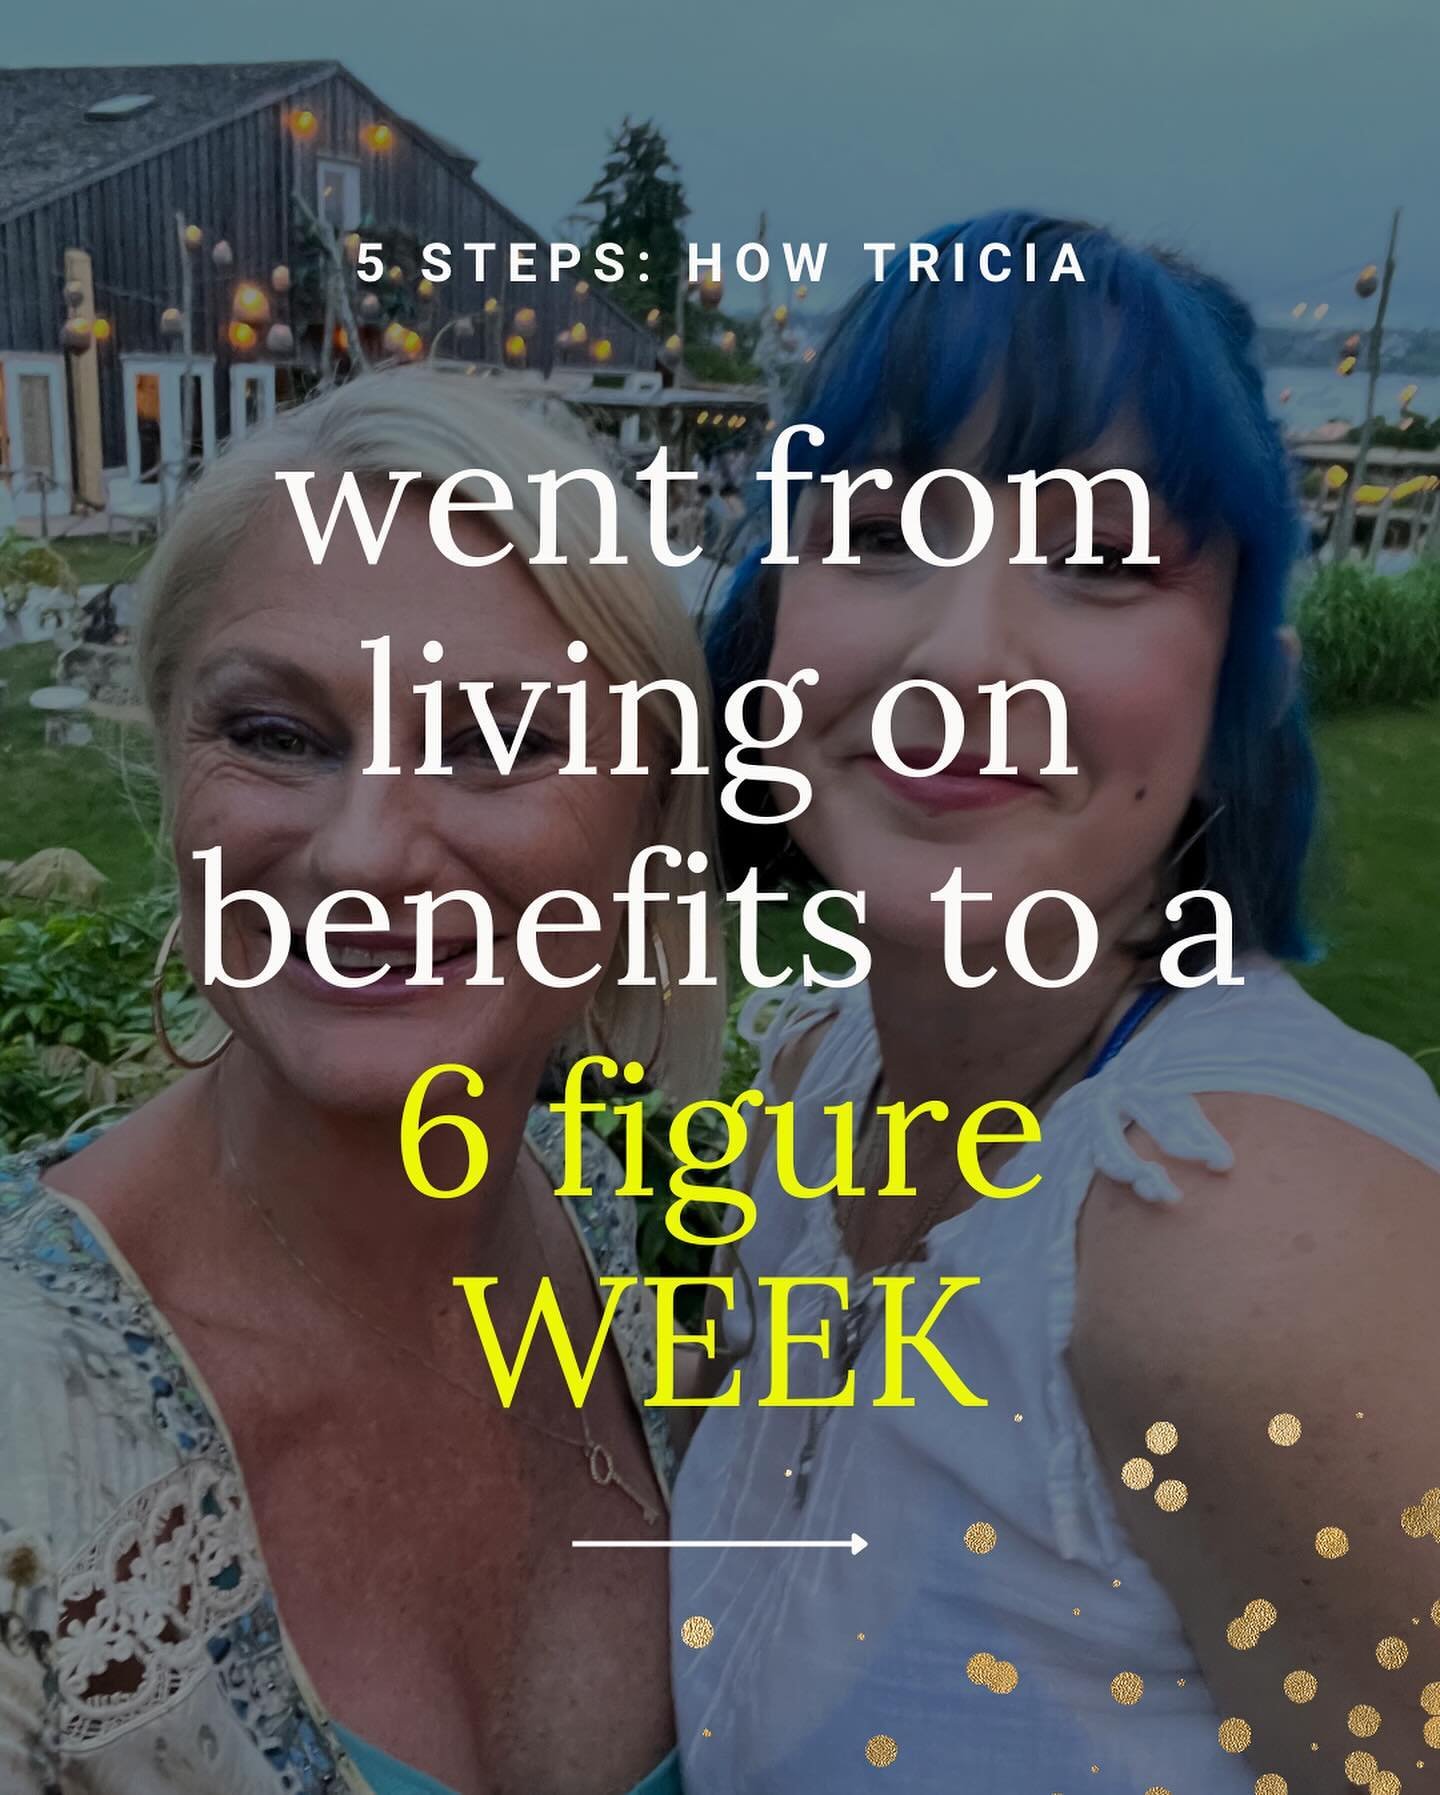 Tricia&rsquo;s been working with me in containers with 1:1 support for over three years now and this result is one in a long list as she builds her business towards 7 figures (and beyond).

And while that&rsquo;s impressive, it&rsquo;s&nbsp;her back 